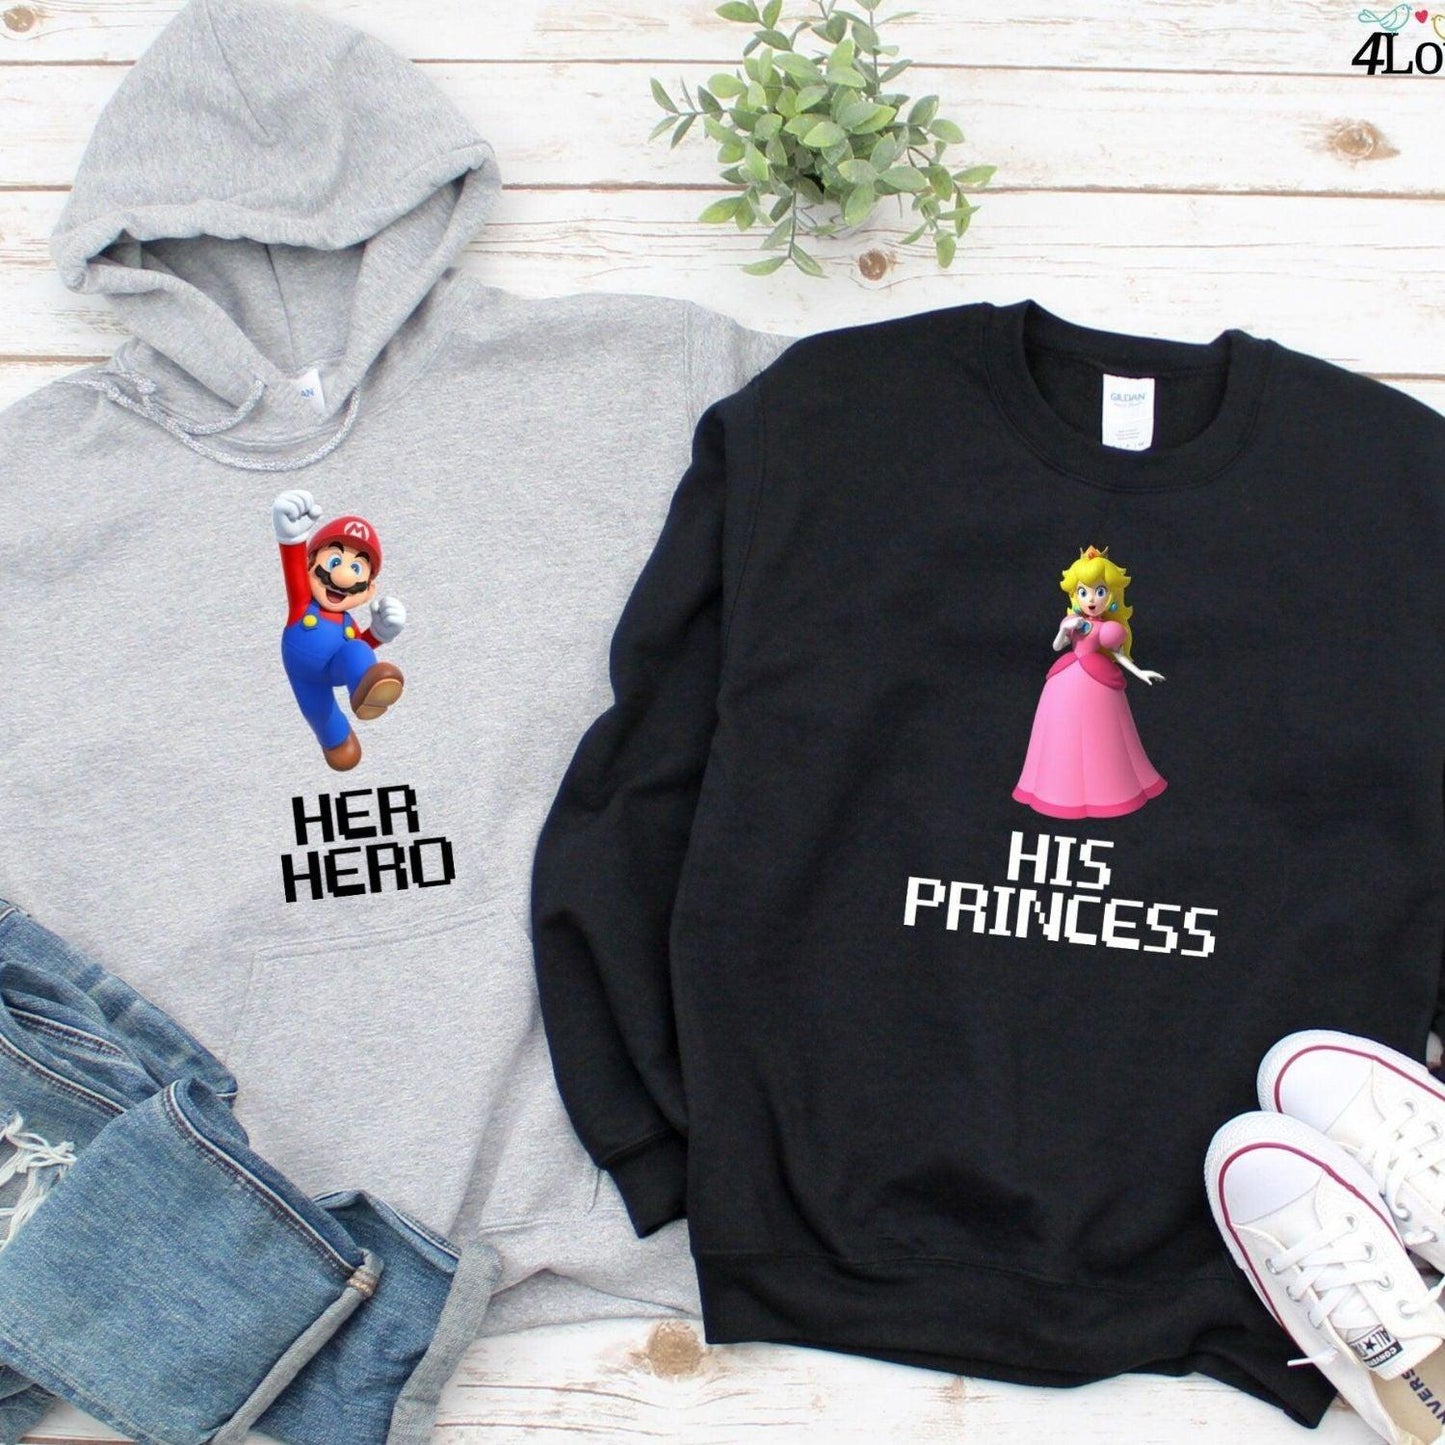 Her Hero, His Princess: Super Mario Matching Outfits for Gaming Couples - 4Lovebirds